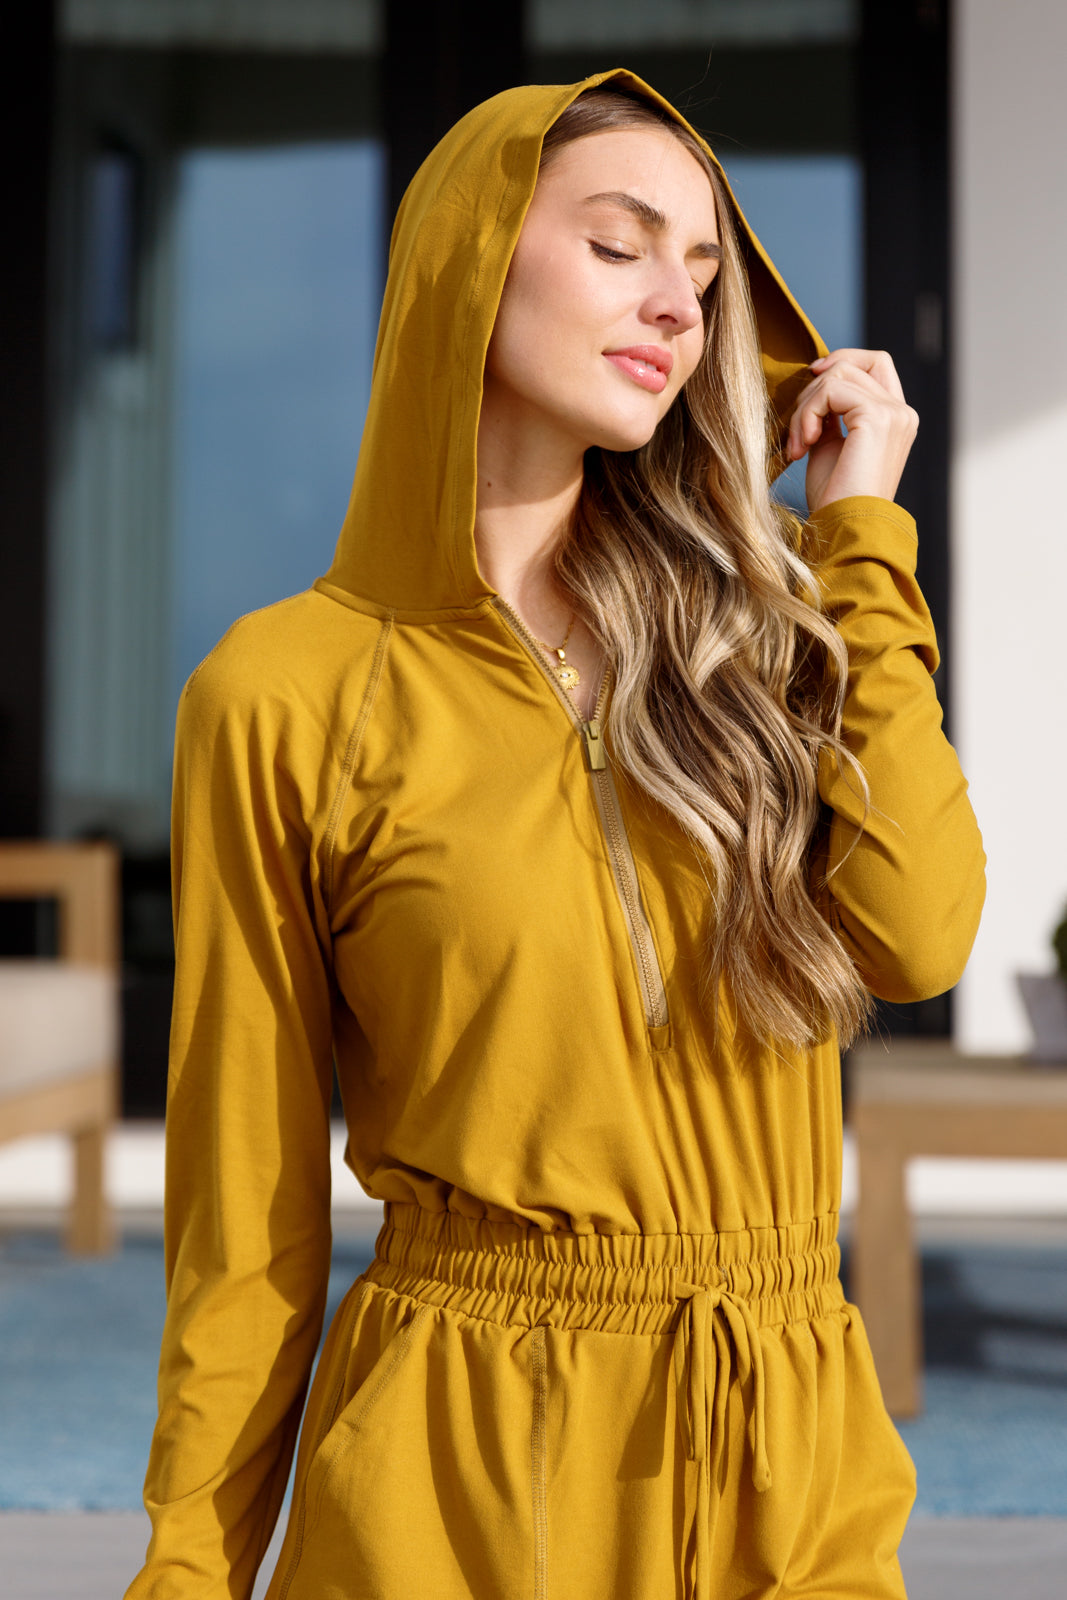 Getting Out Long Sleeve Hoodie Romper Gold Spice - 5/13